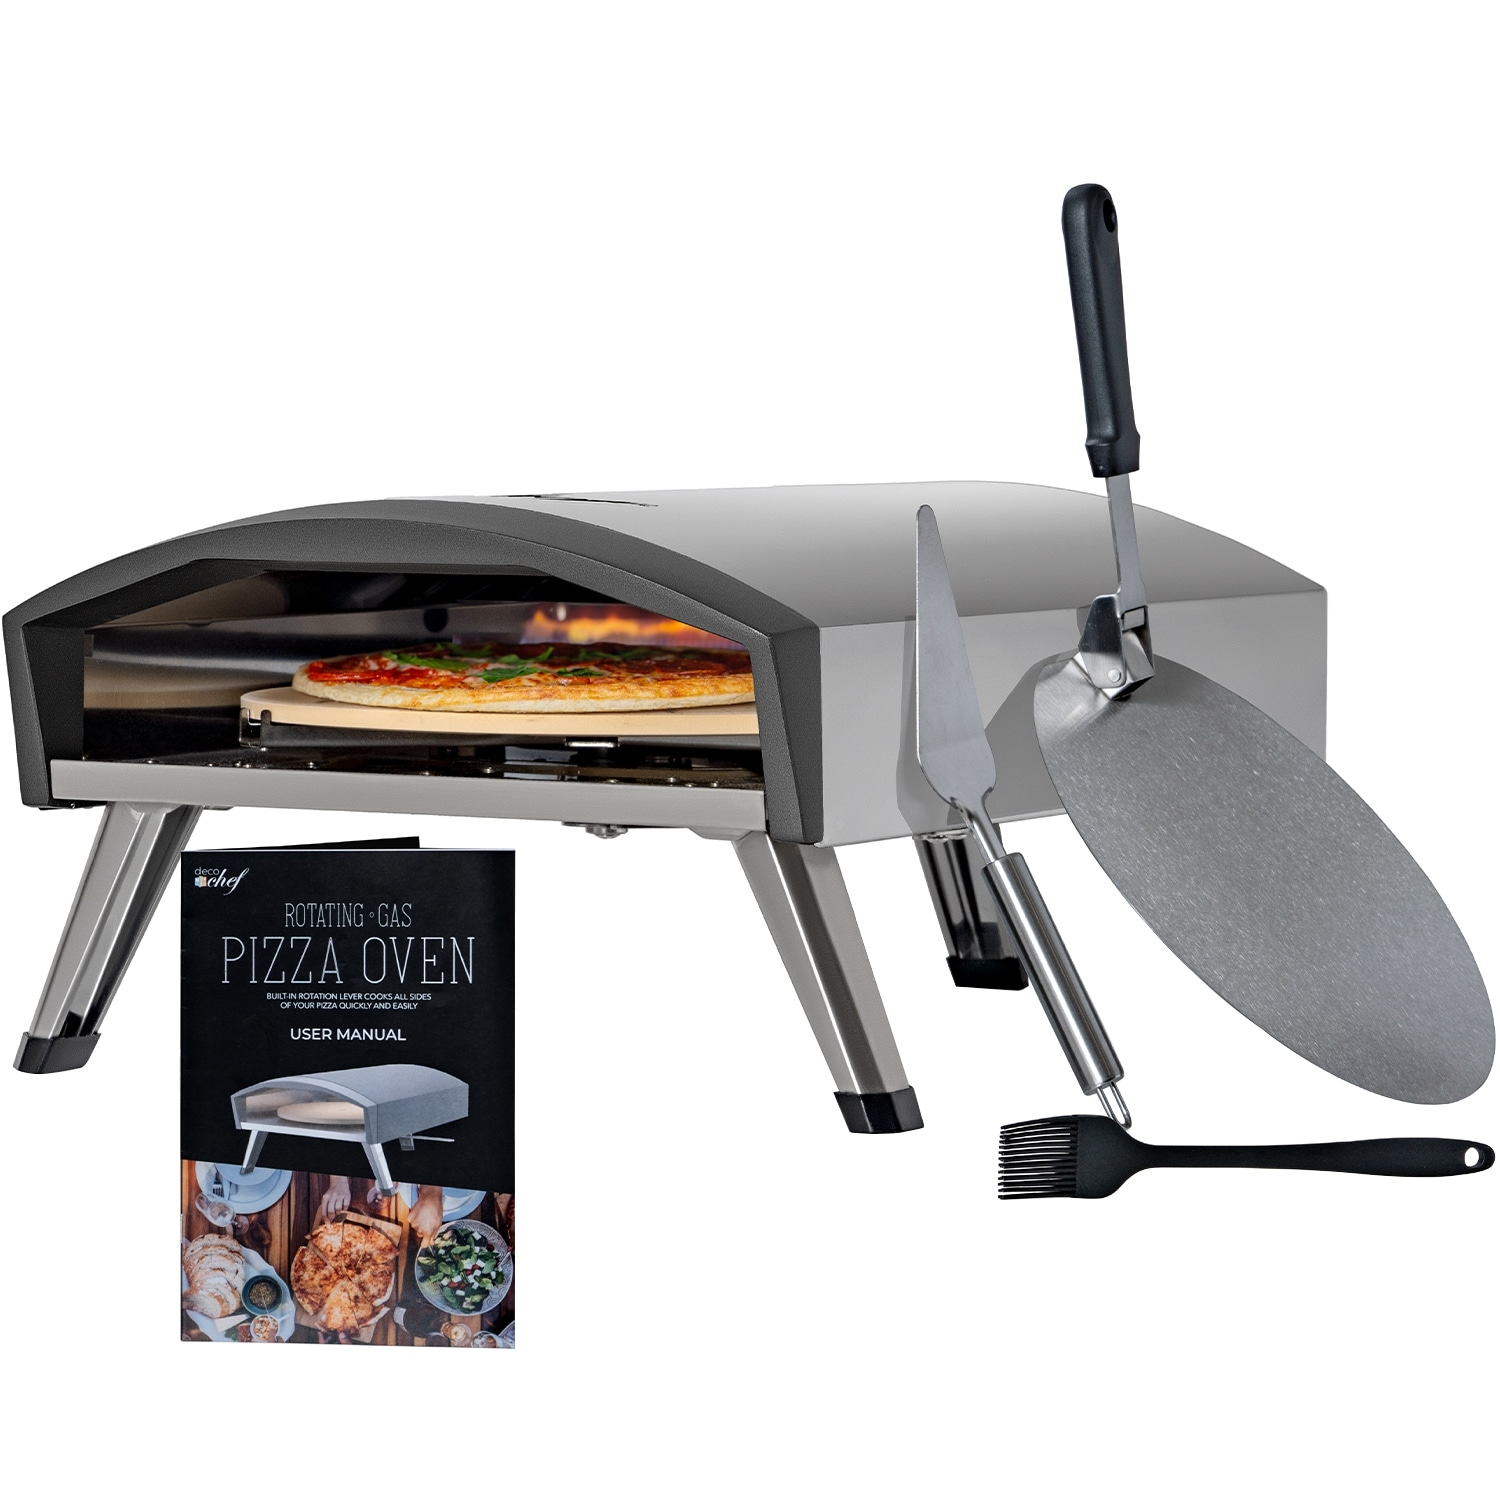 VEVOR Electric Countertop Pizza Oven 12 in. 1500-Watt Commercial Pizza Oven with Adjustable Temp, Outdoor Pizza Oven, Silver